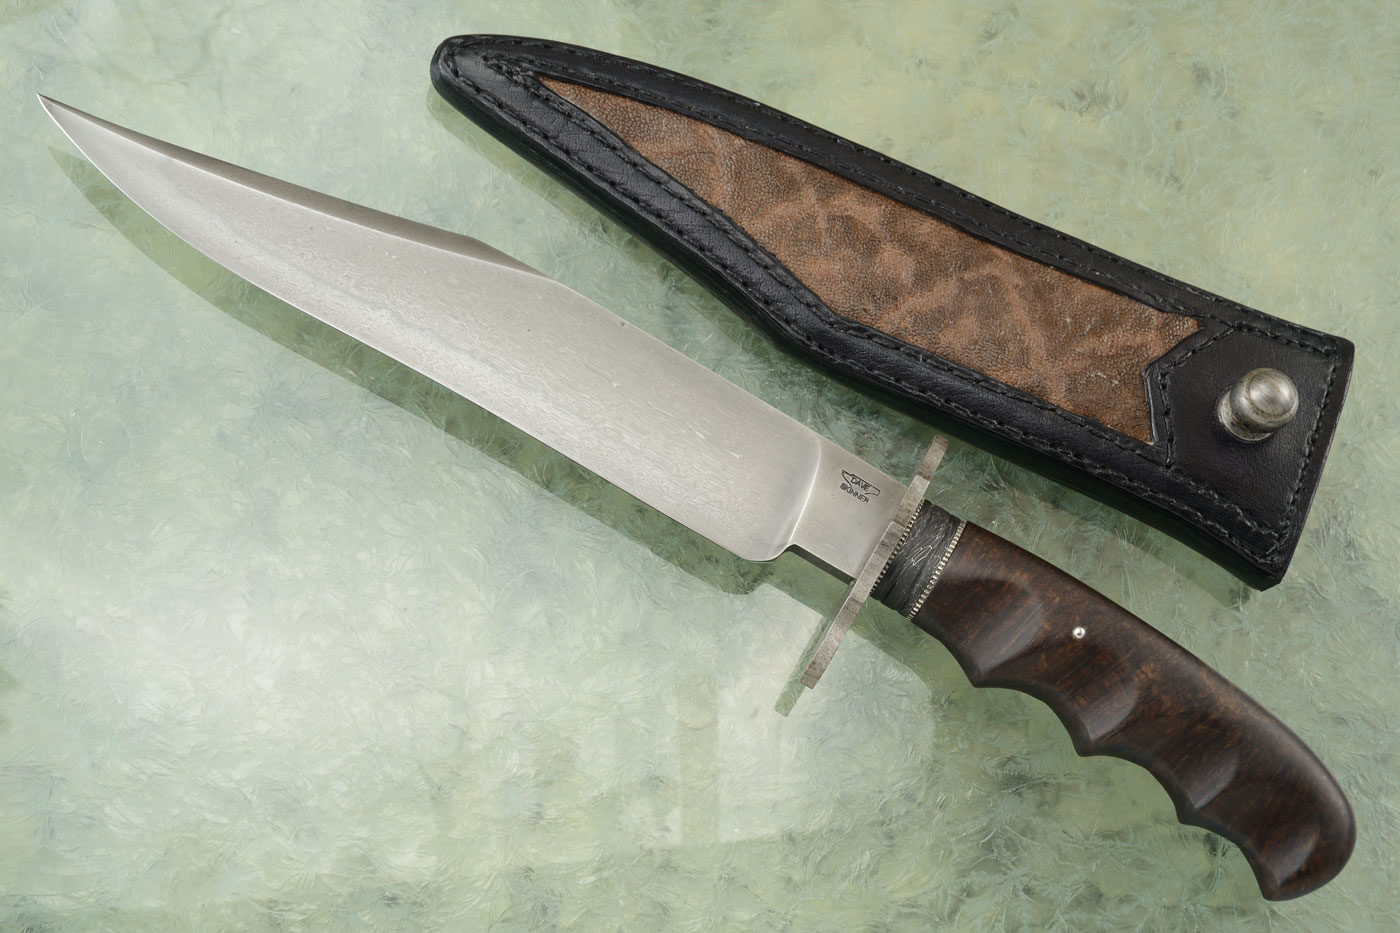 Hamon Fighter Bowie with Russet Bushwillow Burl